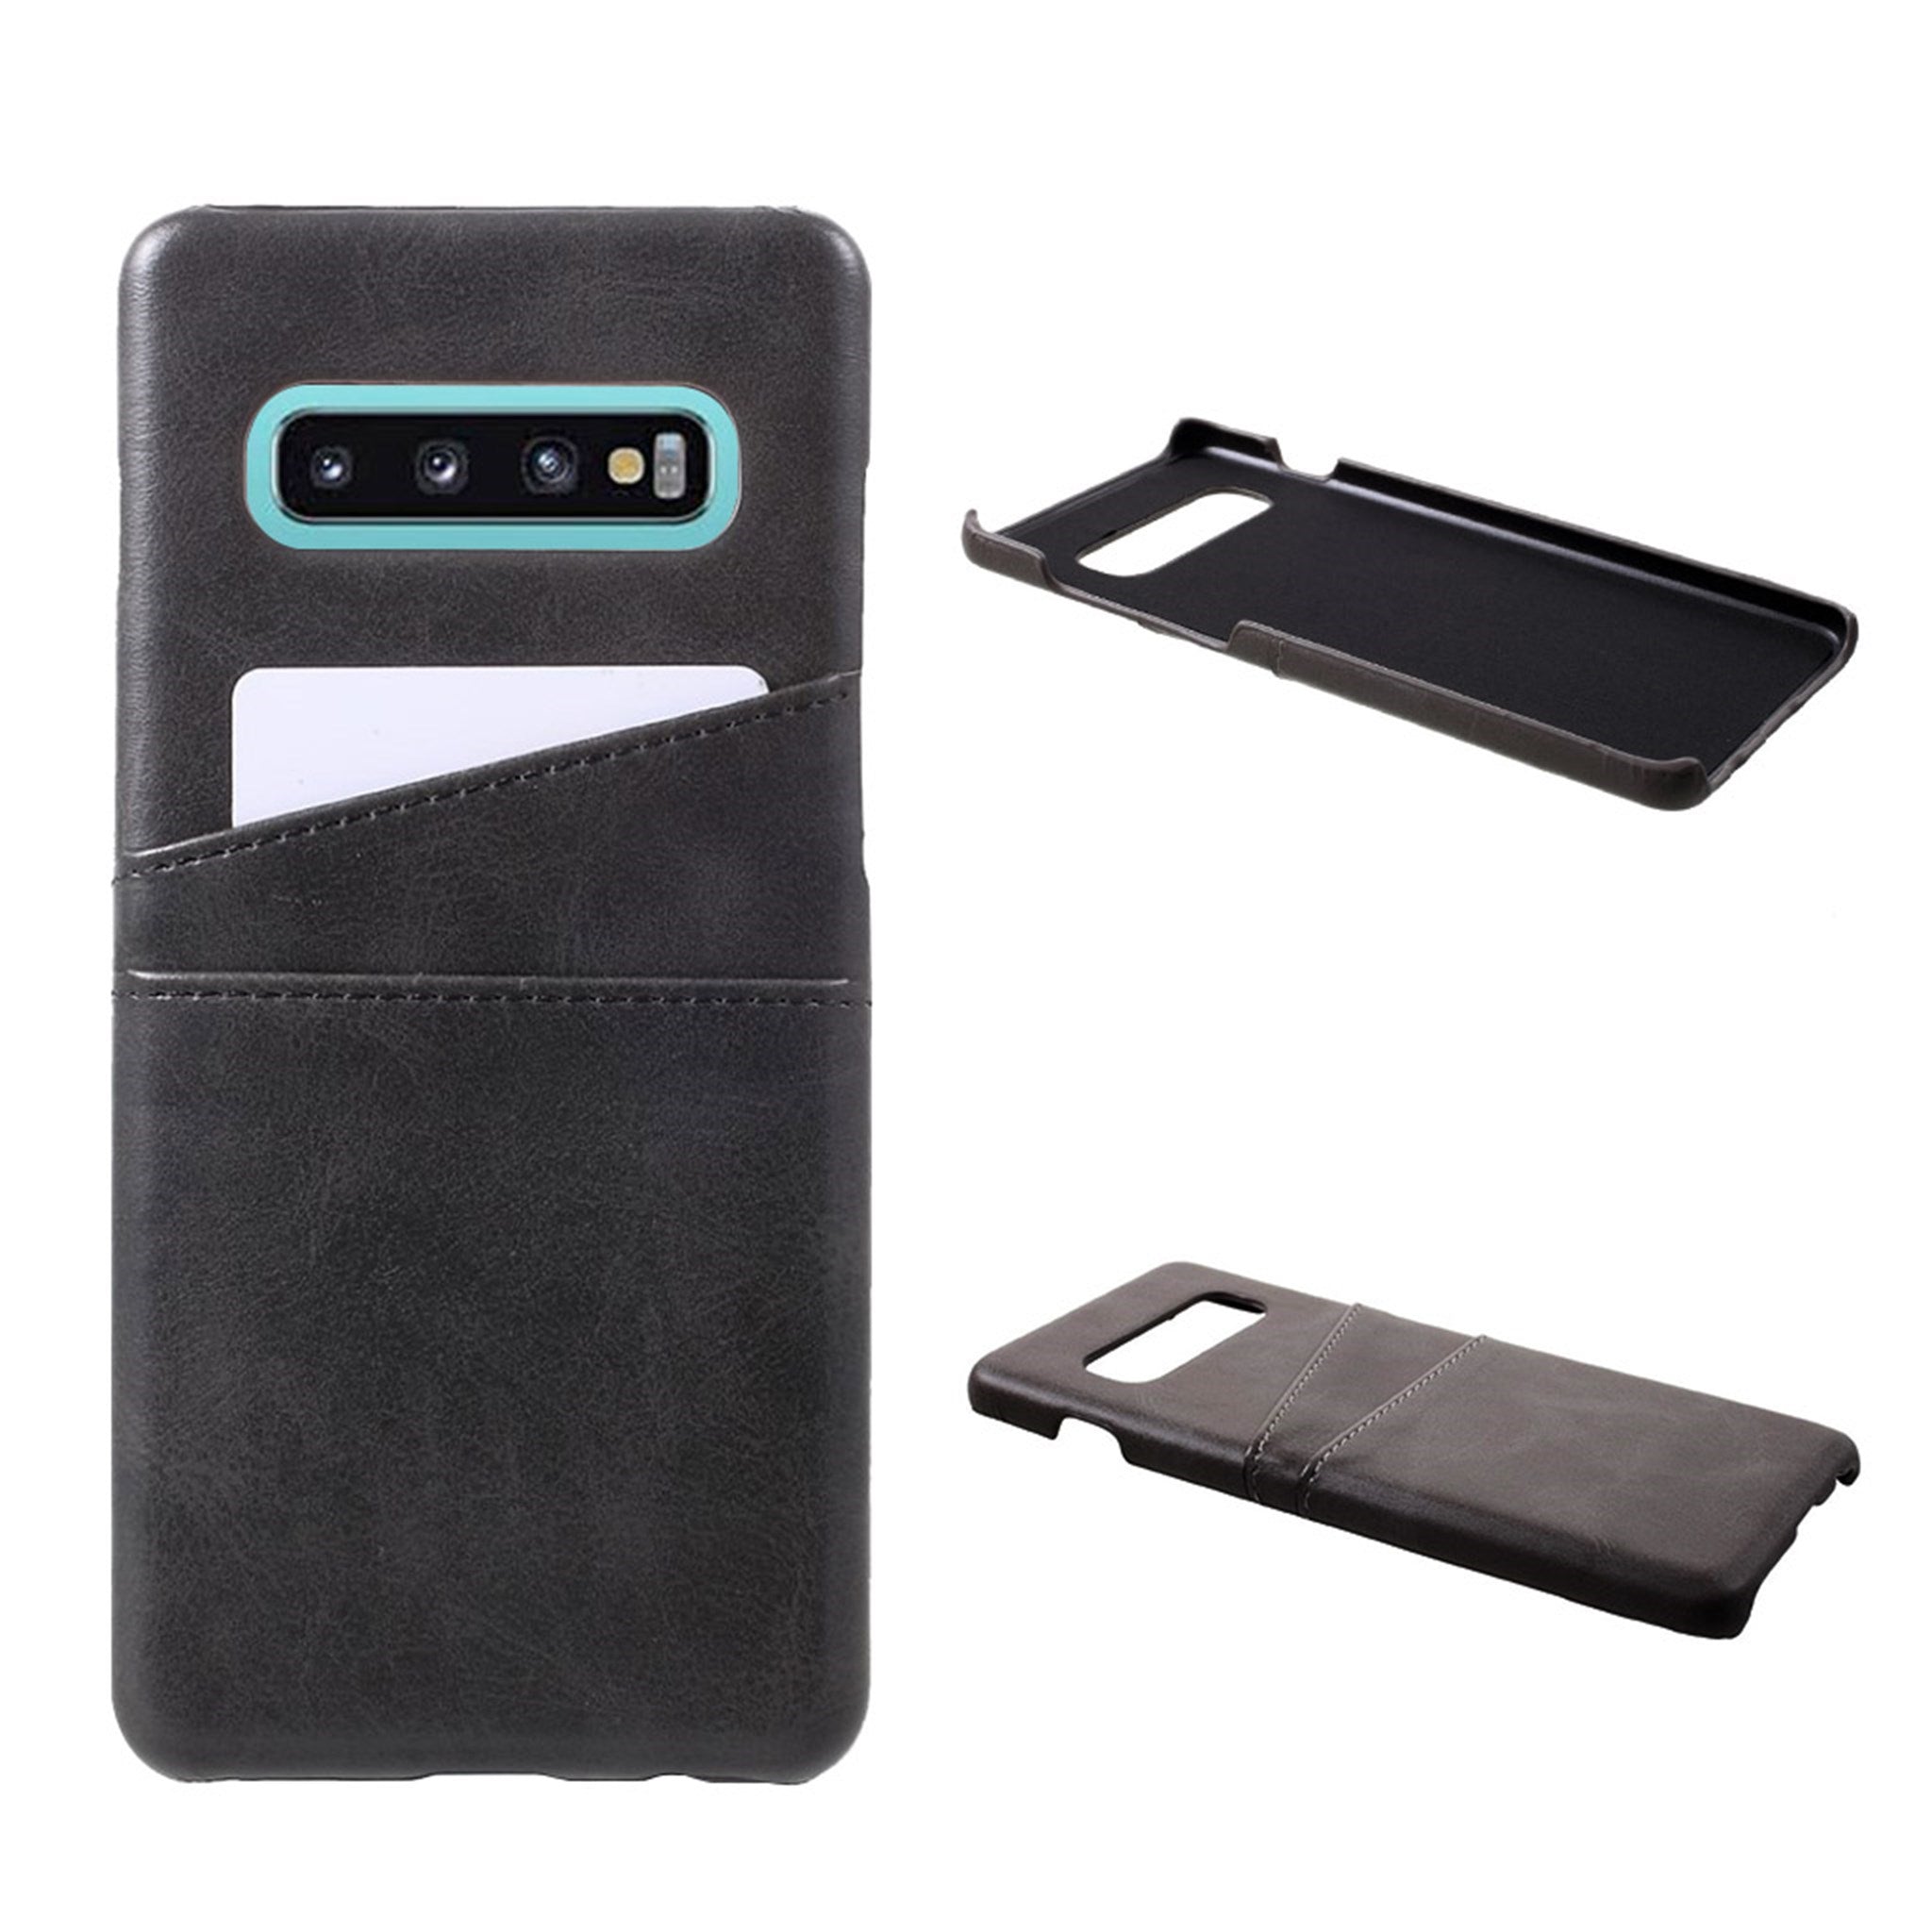 Samsung Galaxy S10 Plus leather case with card slots - Black